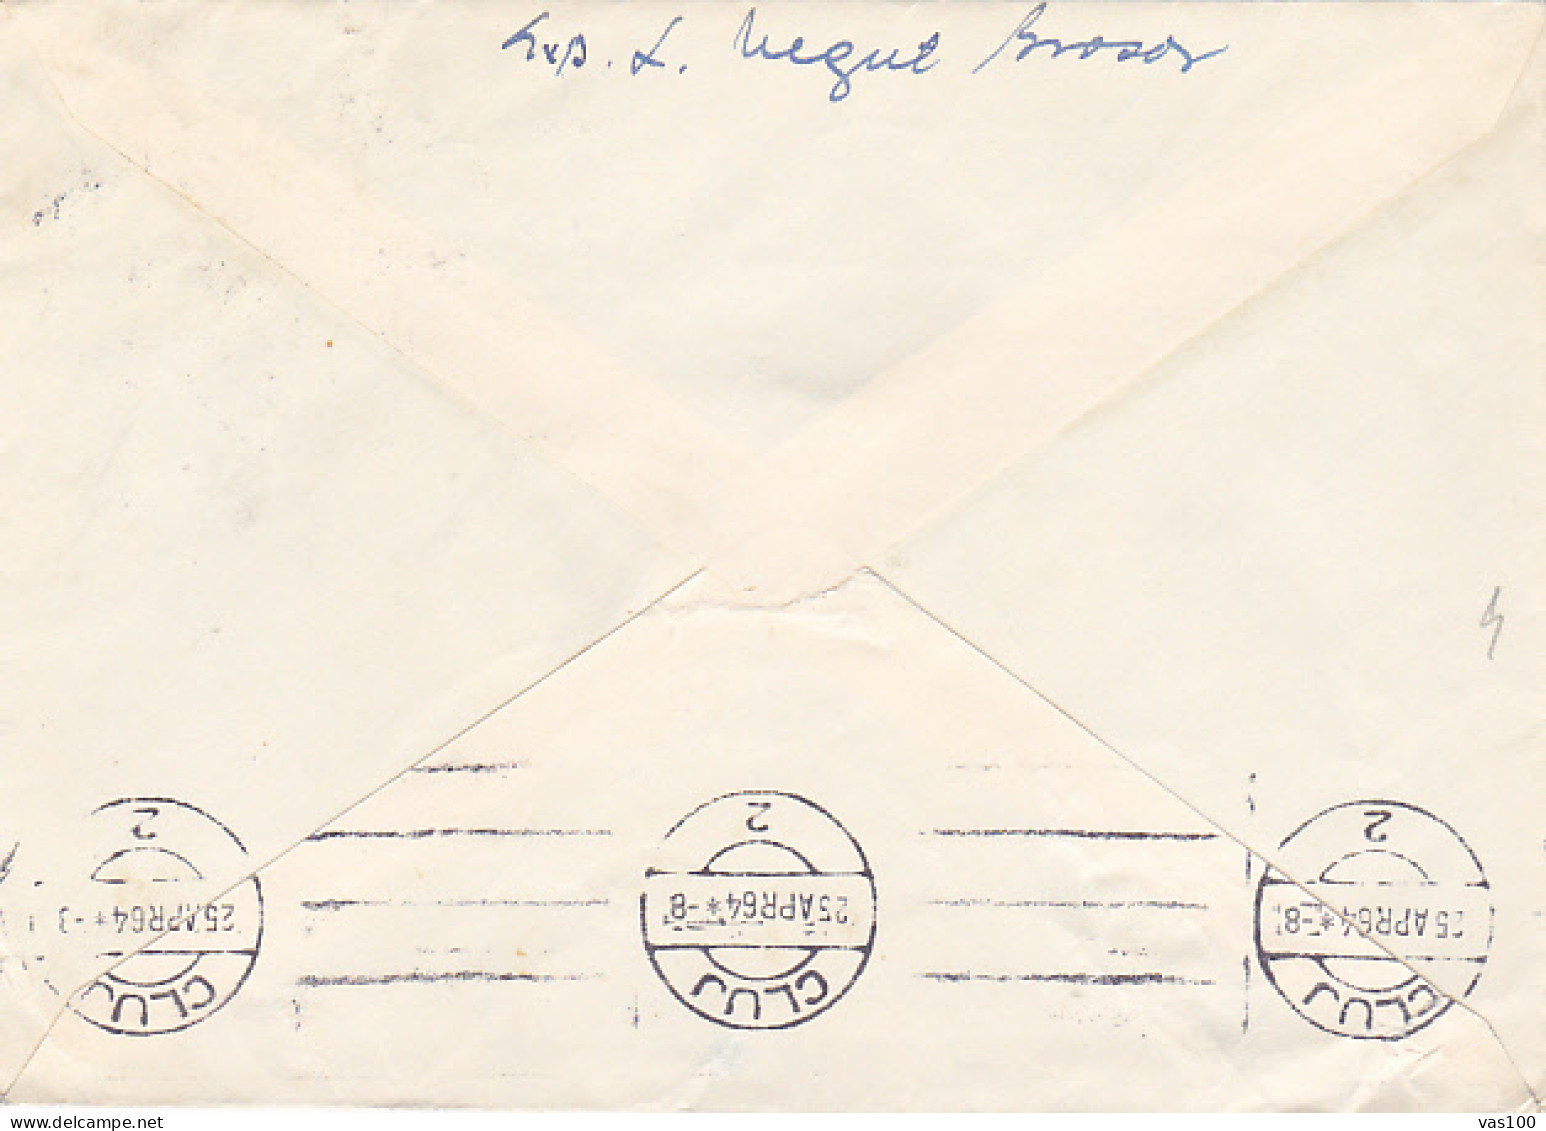 ROWING, TEAM OF 2, STAMP ON COVER, 1964, ROMANIA - Covers & Documents